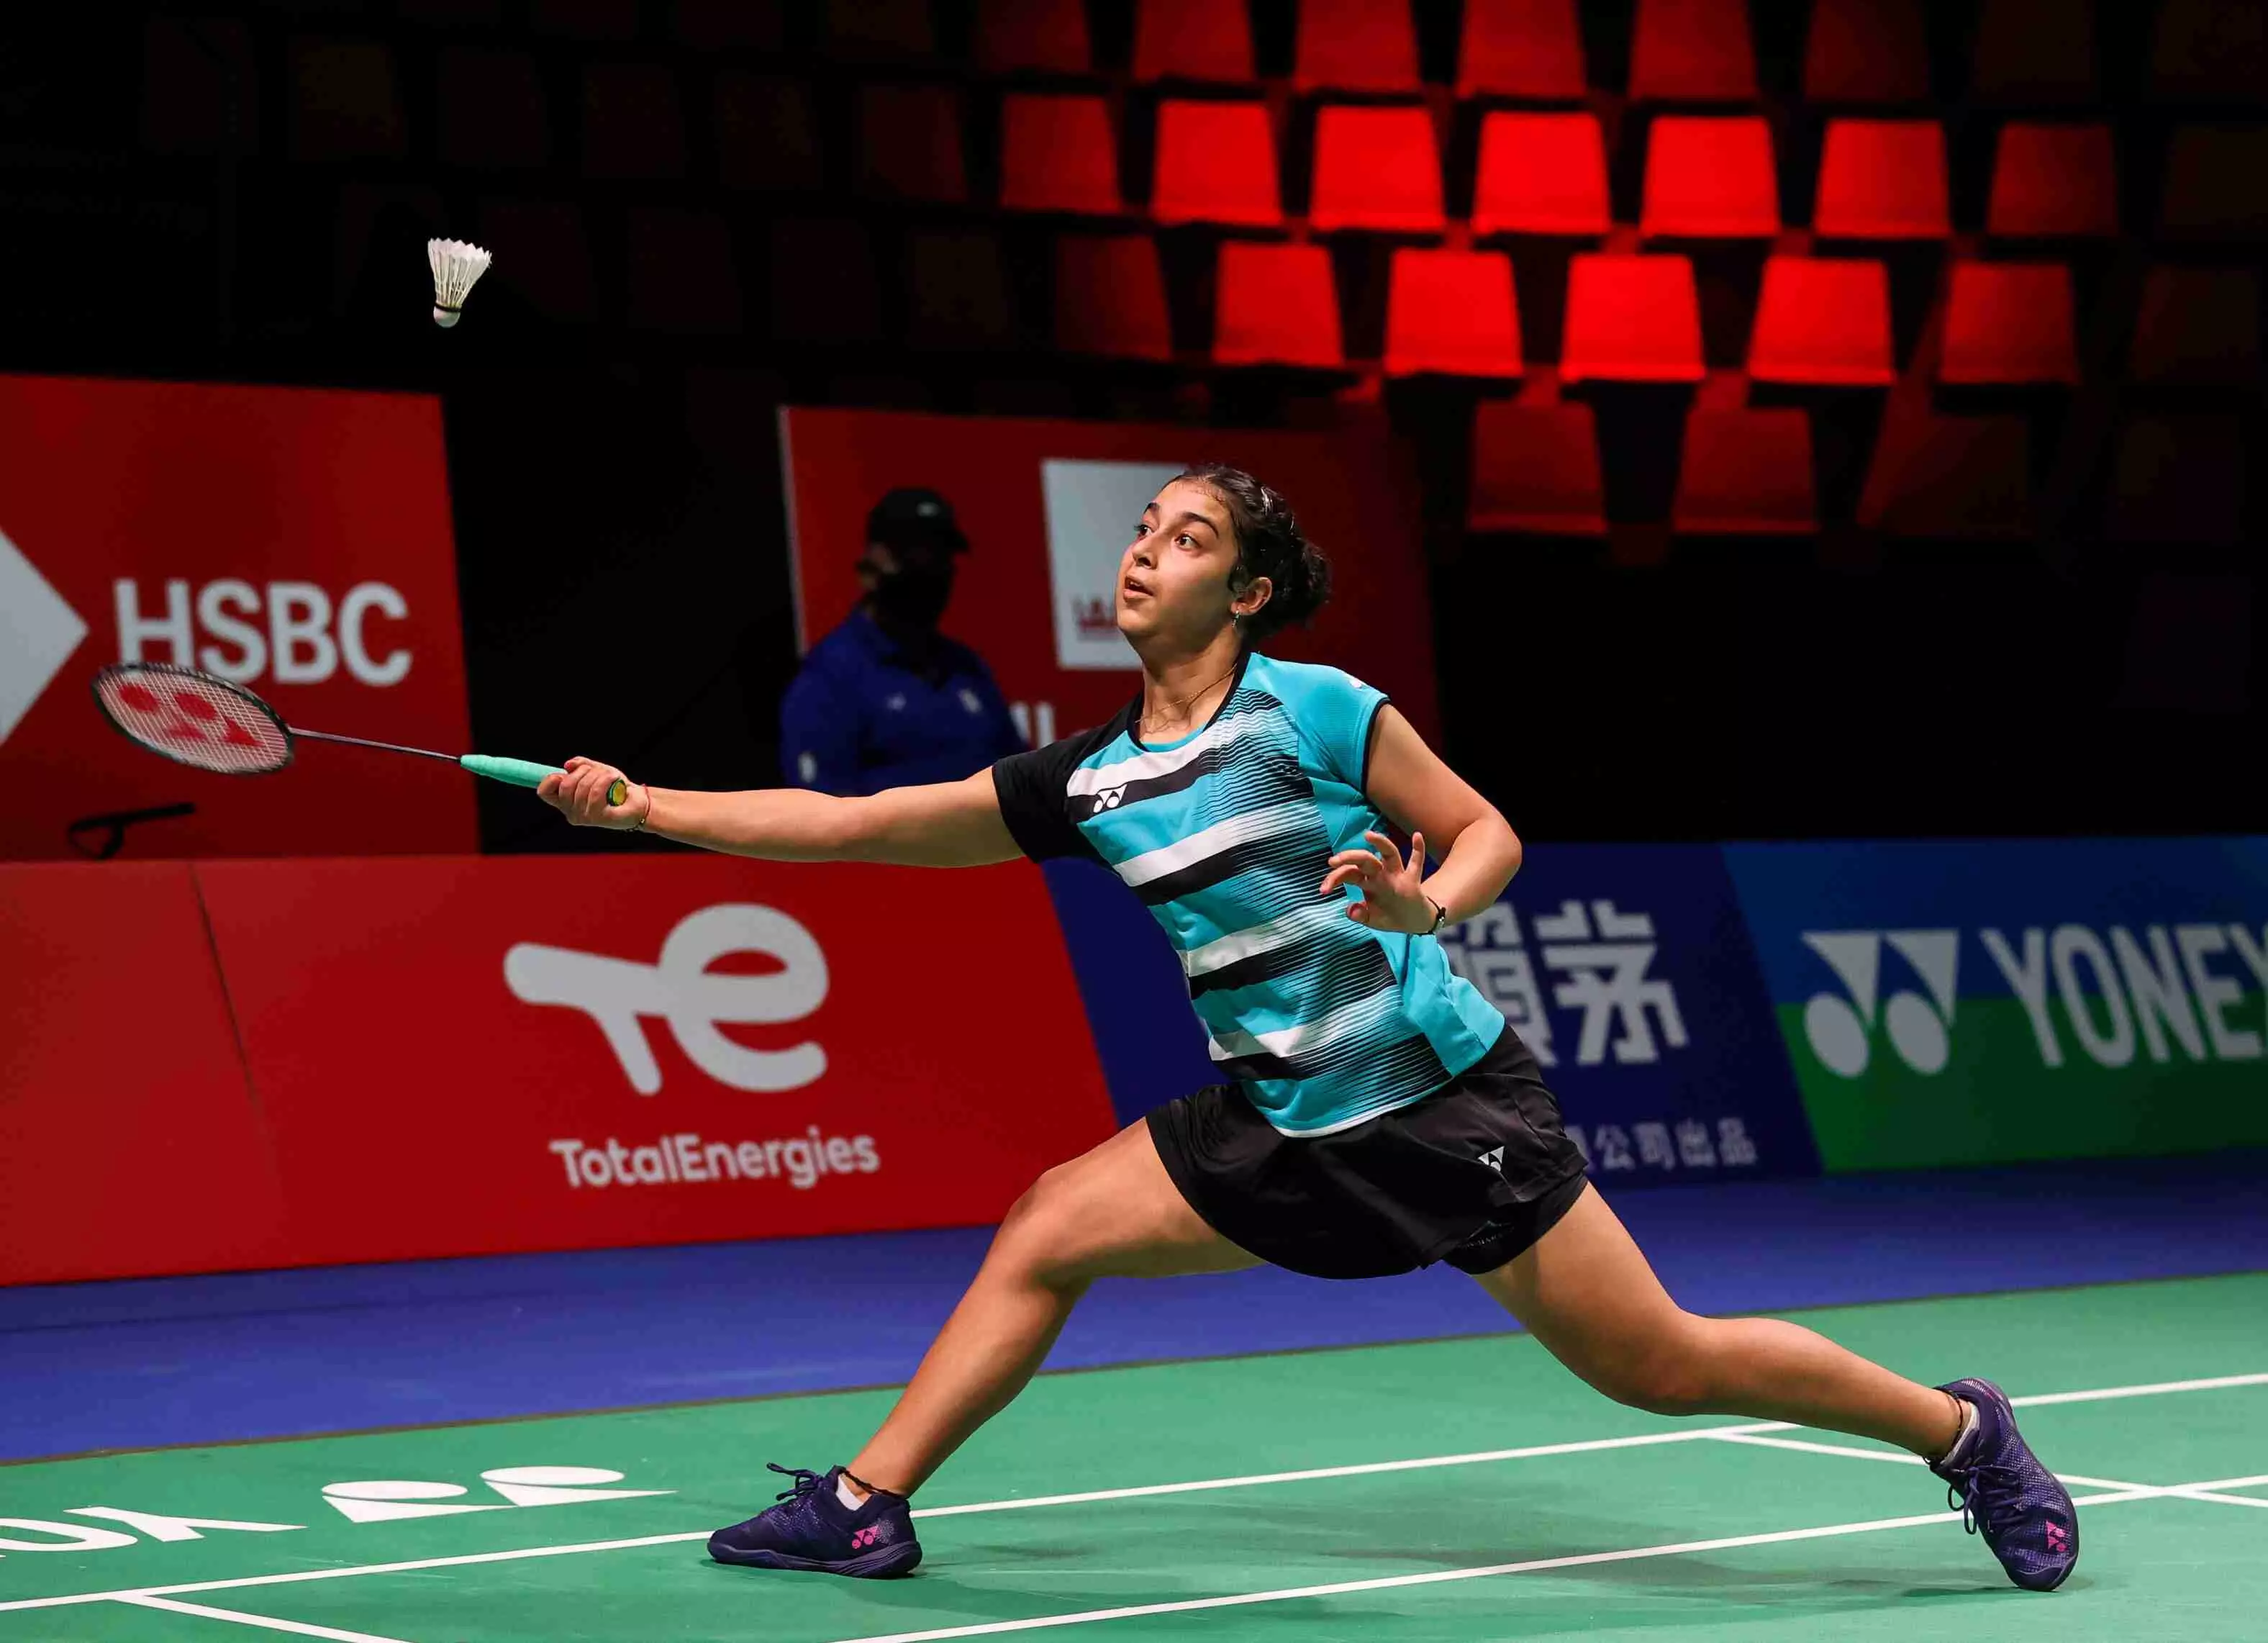 Aditi, an admirer of Olympic silver medallist Tai Tzu Ying, is eager to play more tournaments in the near future and continue her progress up the ranks. (Source: BWF)